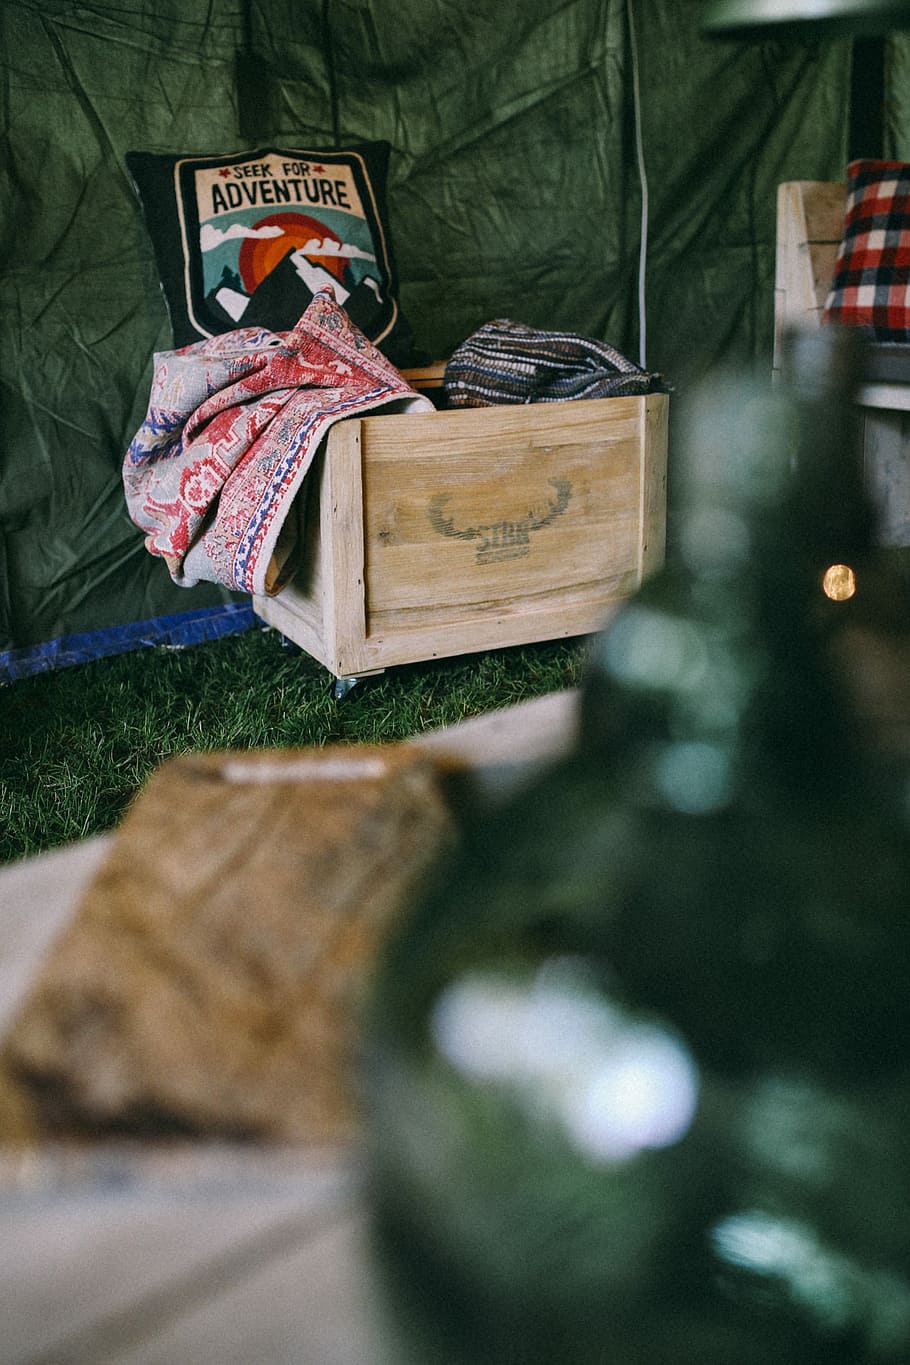 military, styled, tent, Interior, furniture, outdoor, wooden, wood, ten, scandi